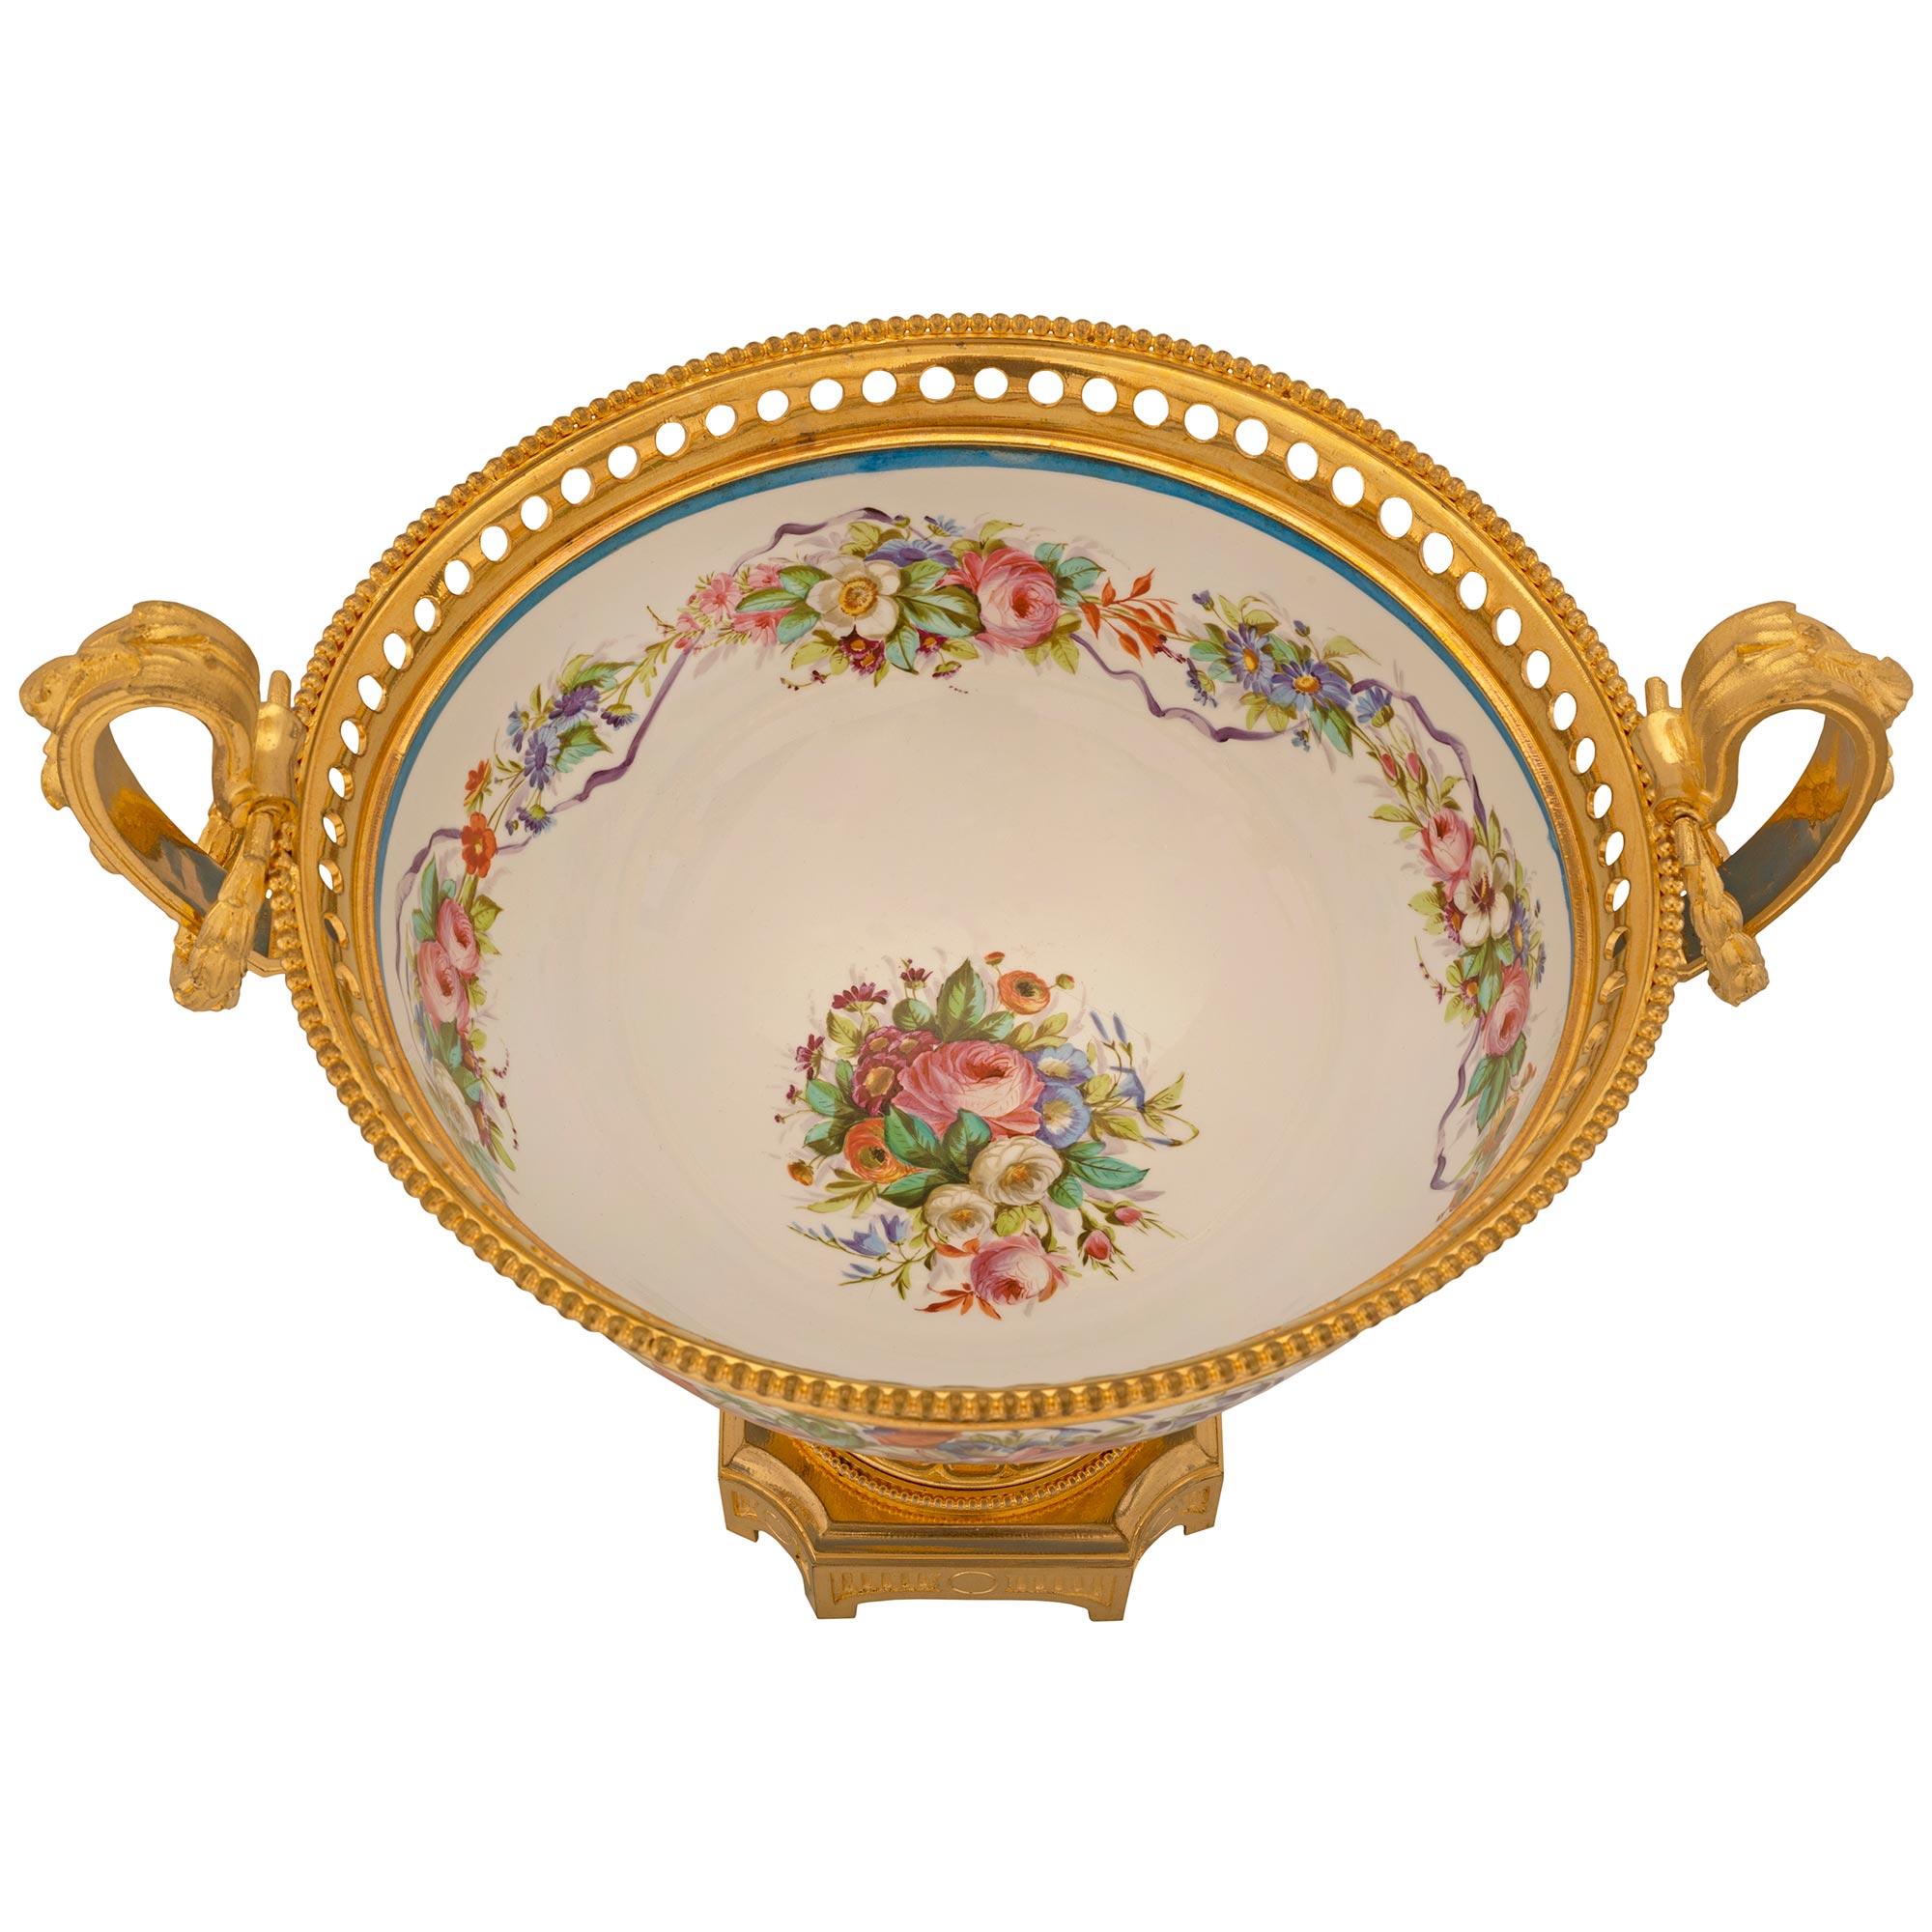 A beautiful and most elegant French 19th century Louis XVI st. Sèvres porcelain and ormolu centerpiece. The oblong shaped centerpiece is raised by a square ormolu base with arched sides, concave corners, fine fluted designs, and a striking fluted